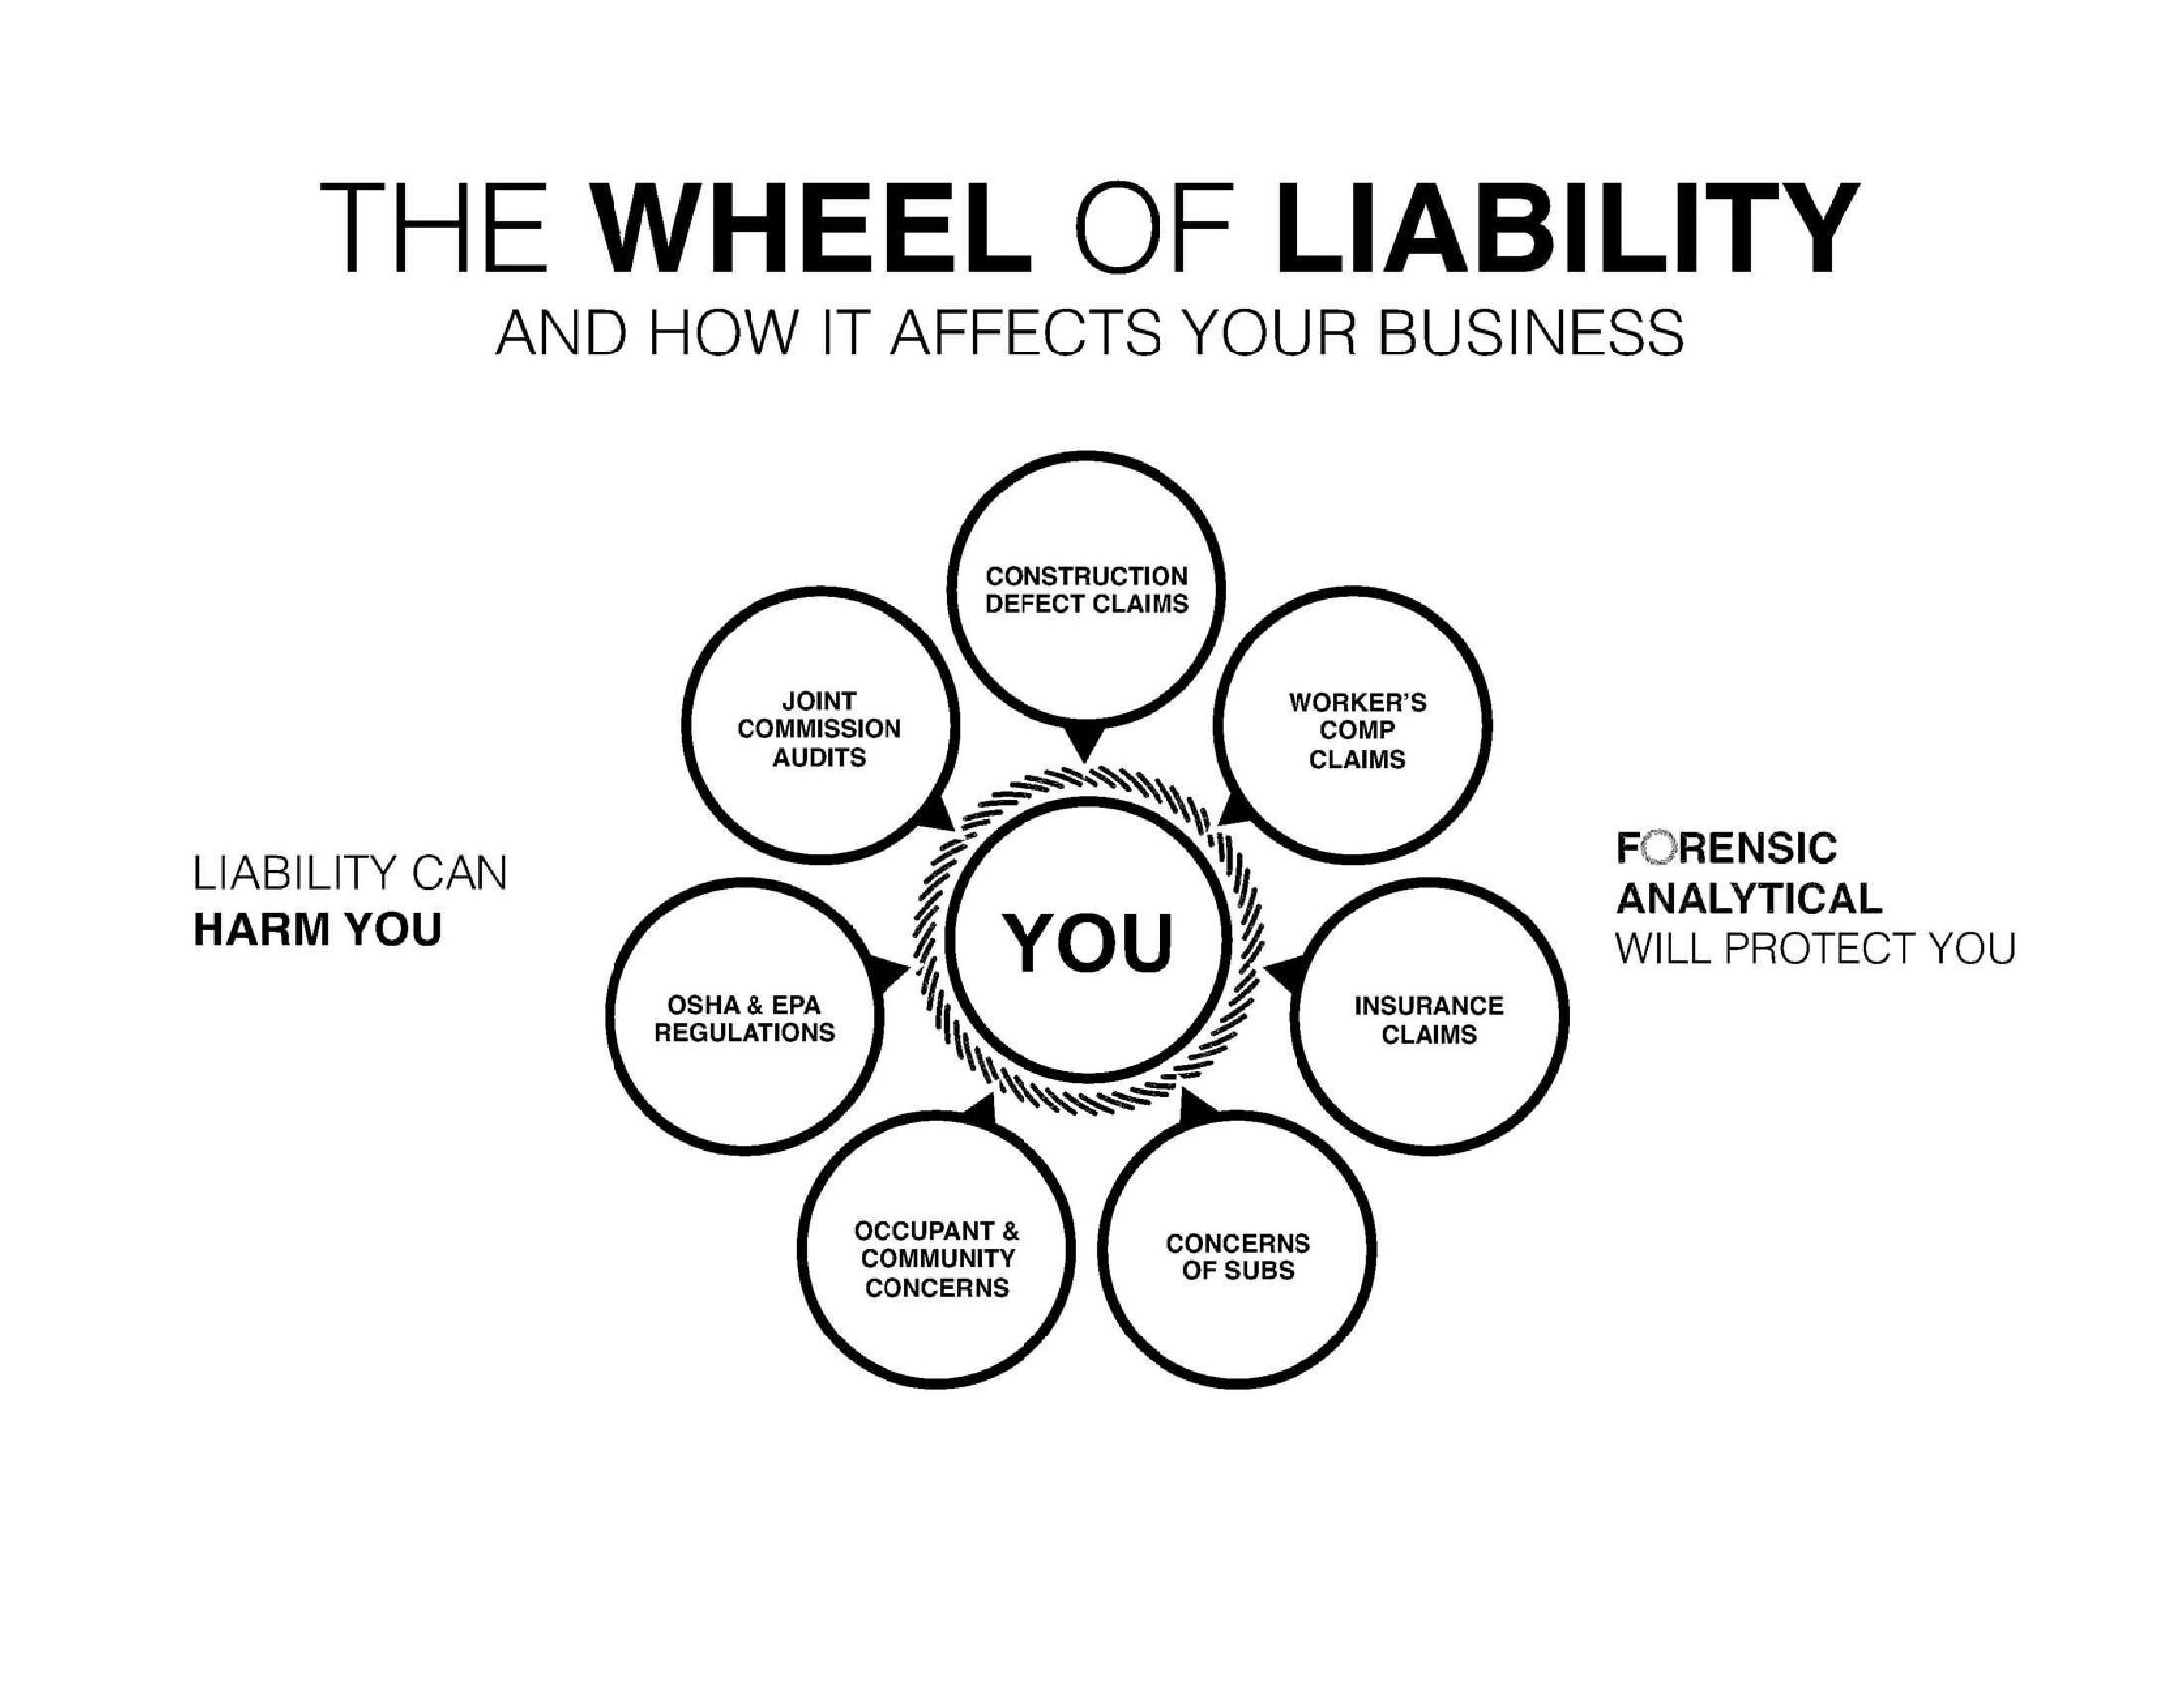 Trademark Logo THE WHEEL OF LIABILITY AND HOW IT AFFECTS YOUR BUSINESS LIABILITY CAN HARM YOU CONSTRUCTION DEFECT CLAIMS WORKER'S COMP CLAIMS INSURANCE CLAIMS CONCERNS OF SUBS OCCUPANT & COMMUNITY CONCERNS OSHA & EPAREGULATIONS JOINT COMMISSION AUDITS YOU FORENSIC ANALYTICAL WILL PROTECT YOU